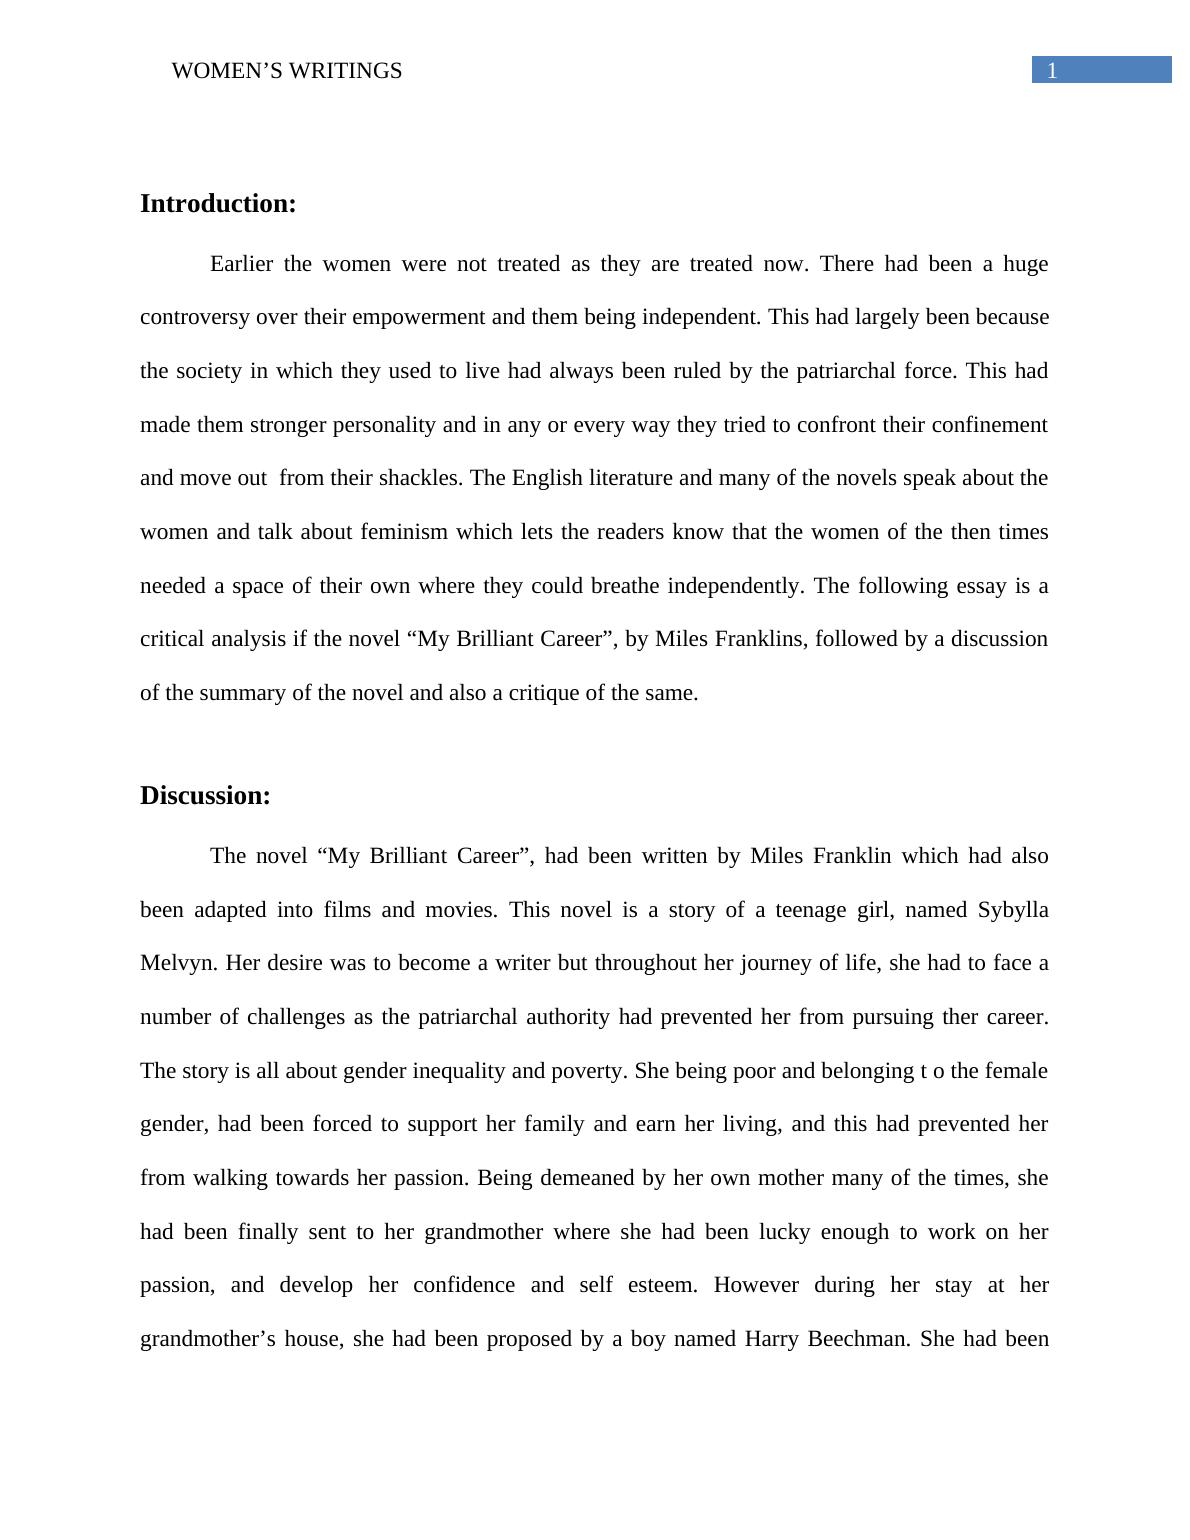 Womens Writings Assignment Report_2